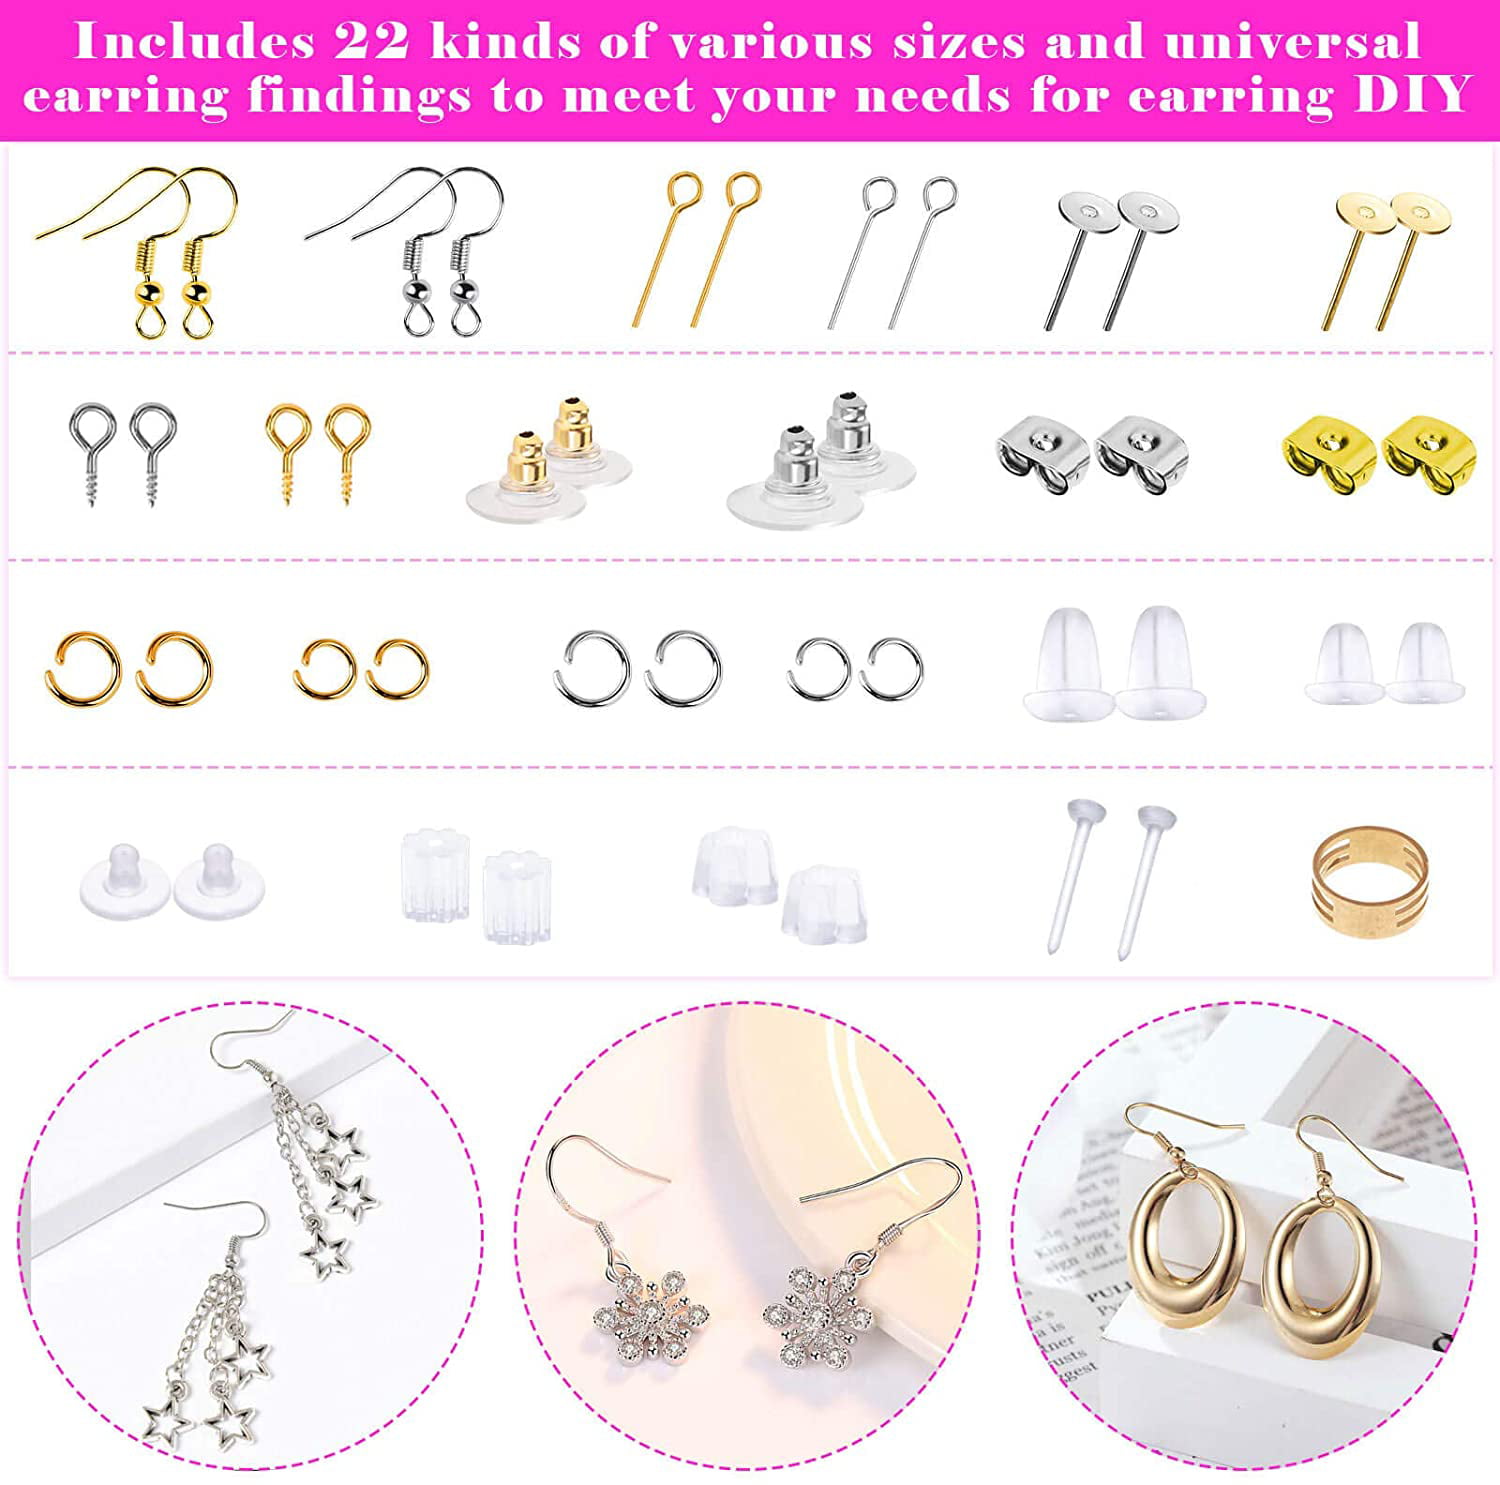 Jewelry Making Earring Making Kit With Fish Hook Earrings, Earring Cards,  Backs and Jump Ring for Jewelry Making 1900pcs, by Fablise Craft 